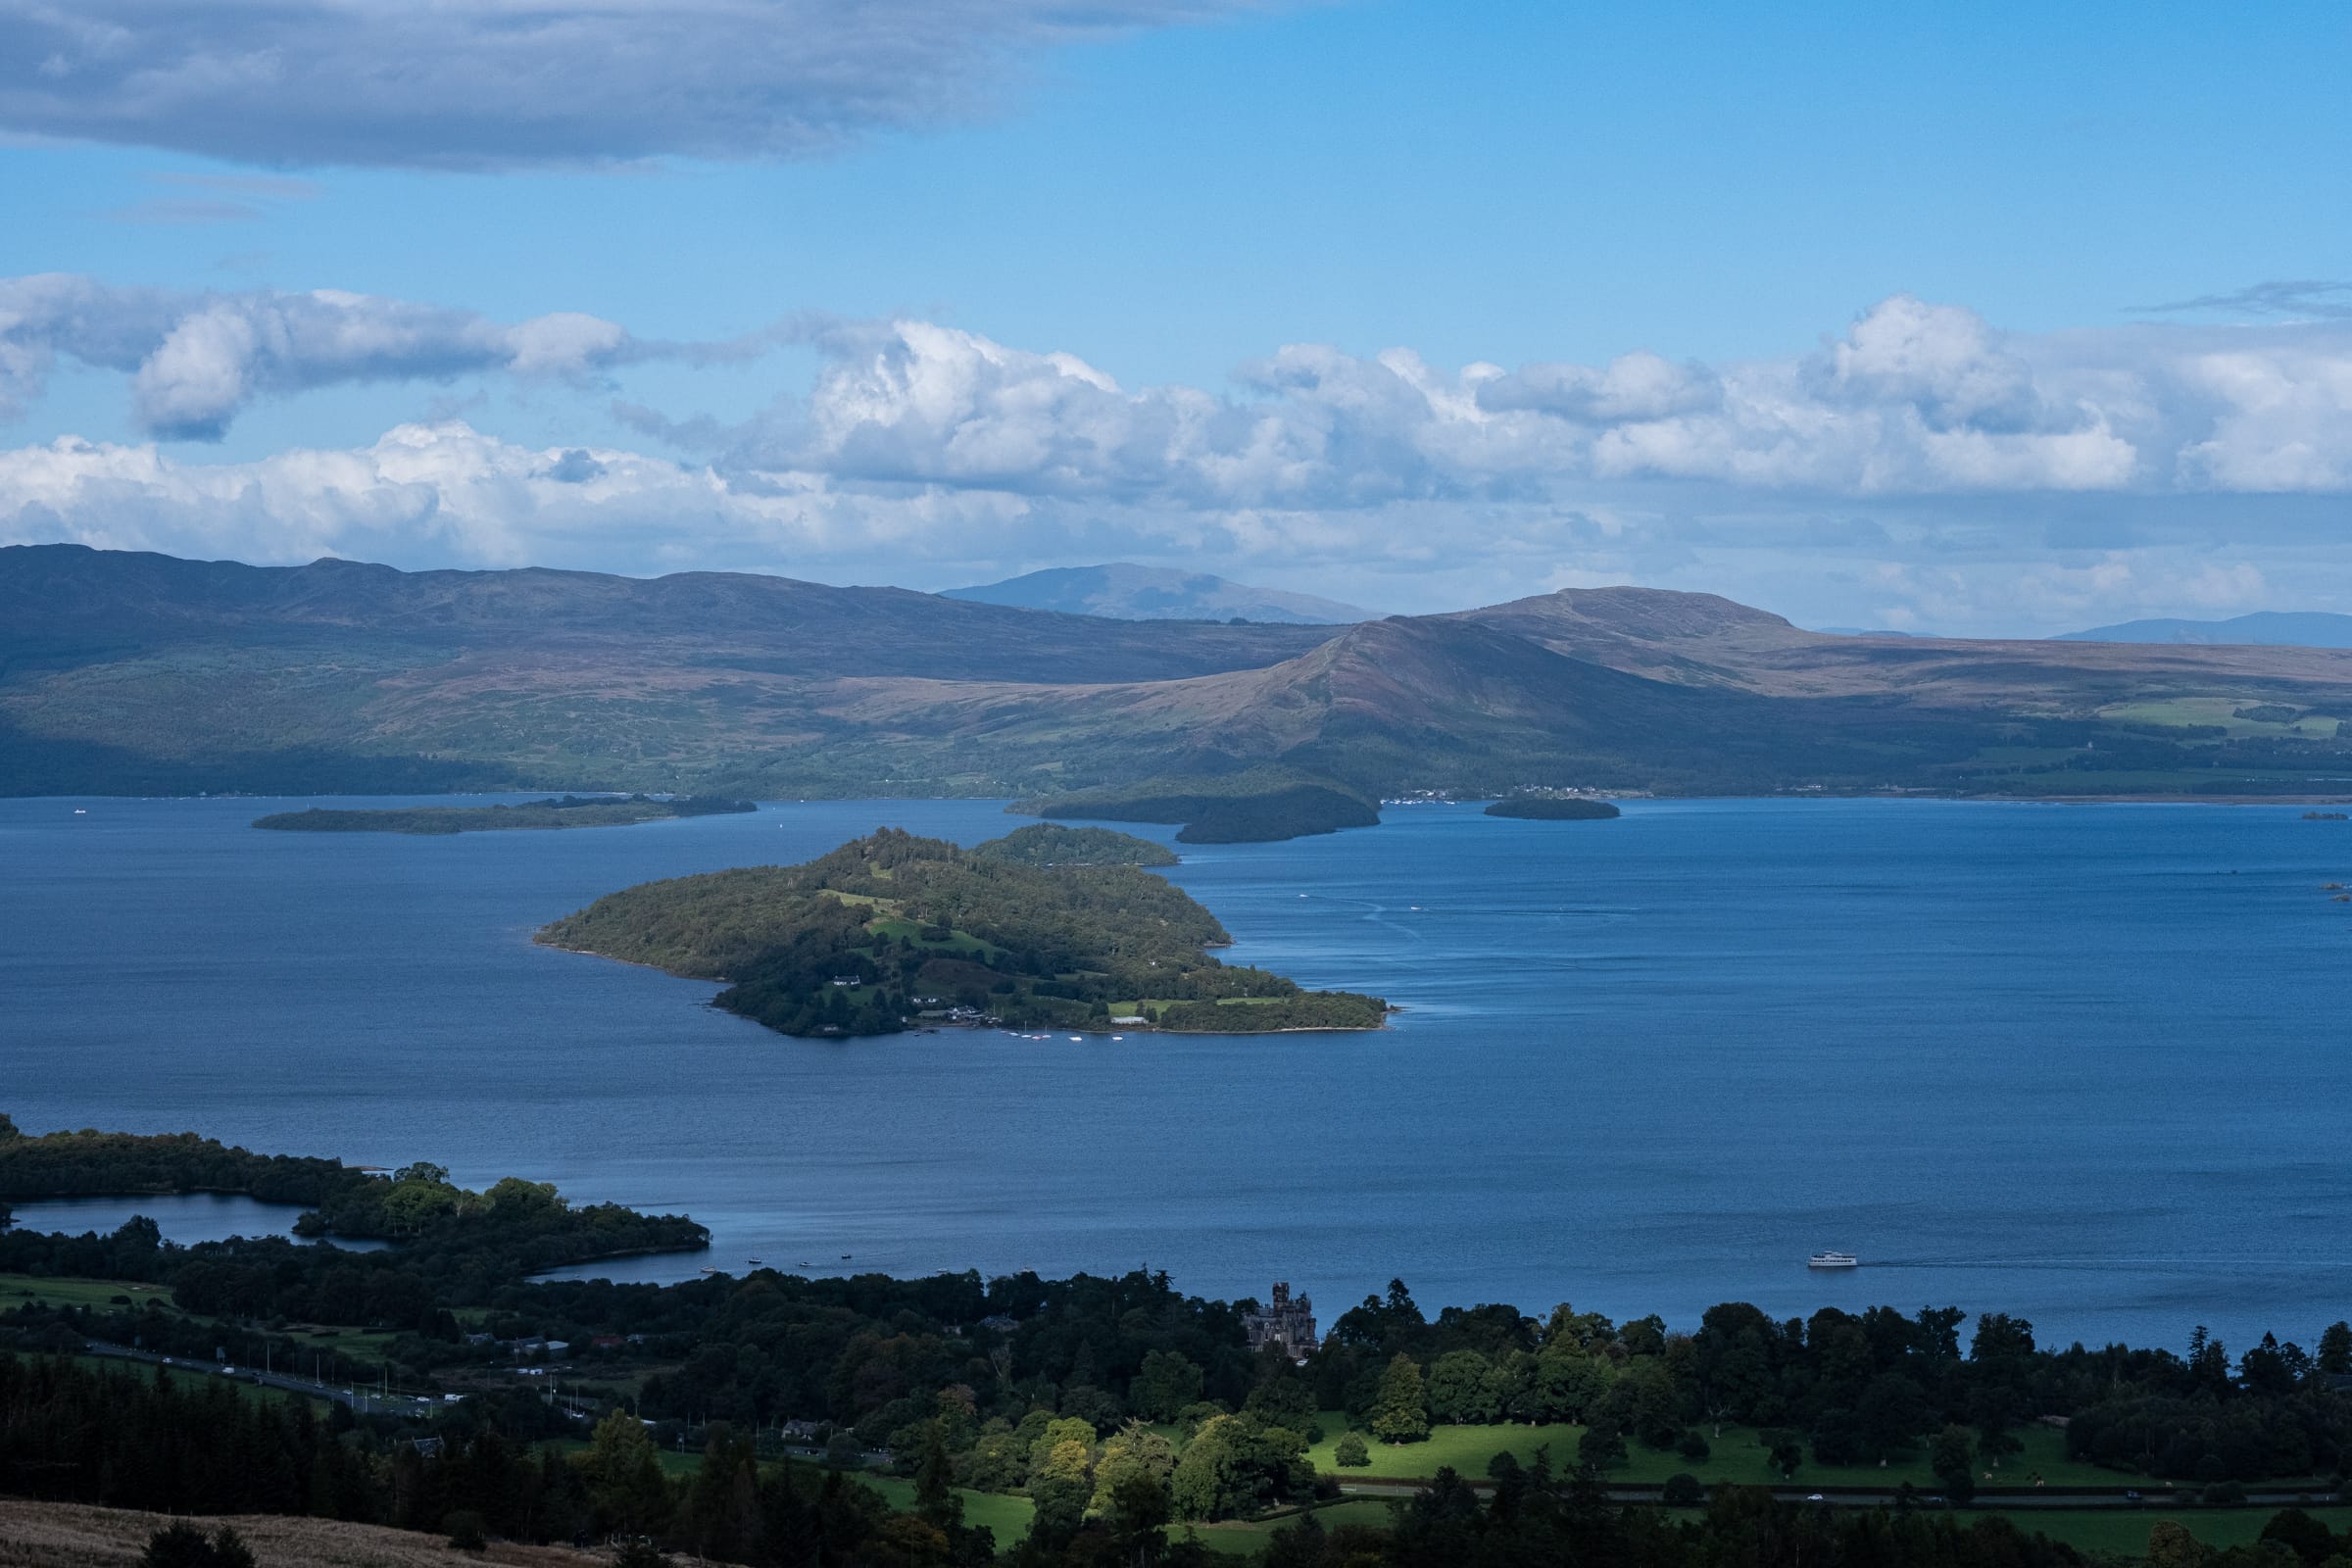 View of Loch Lomond in Scotland with a water bus heading towards a tiny island.